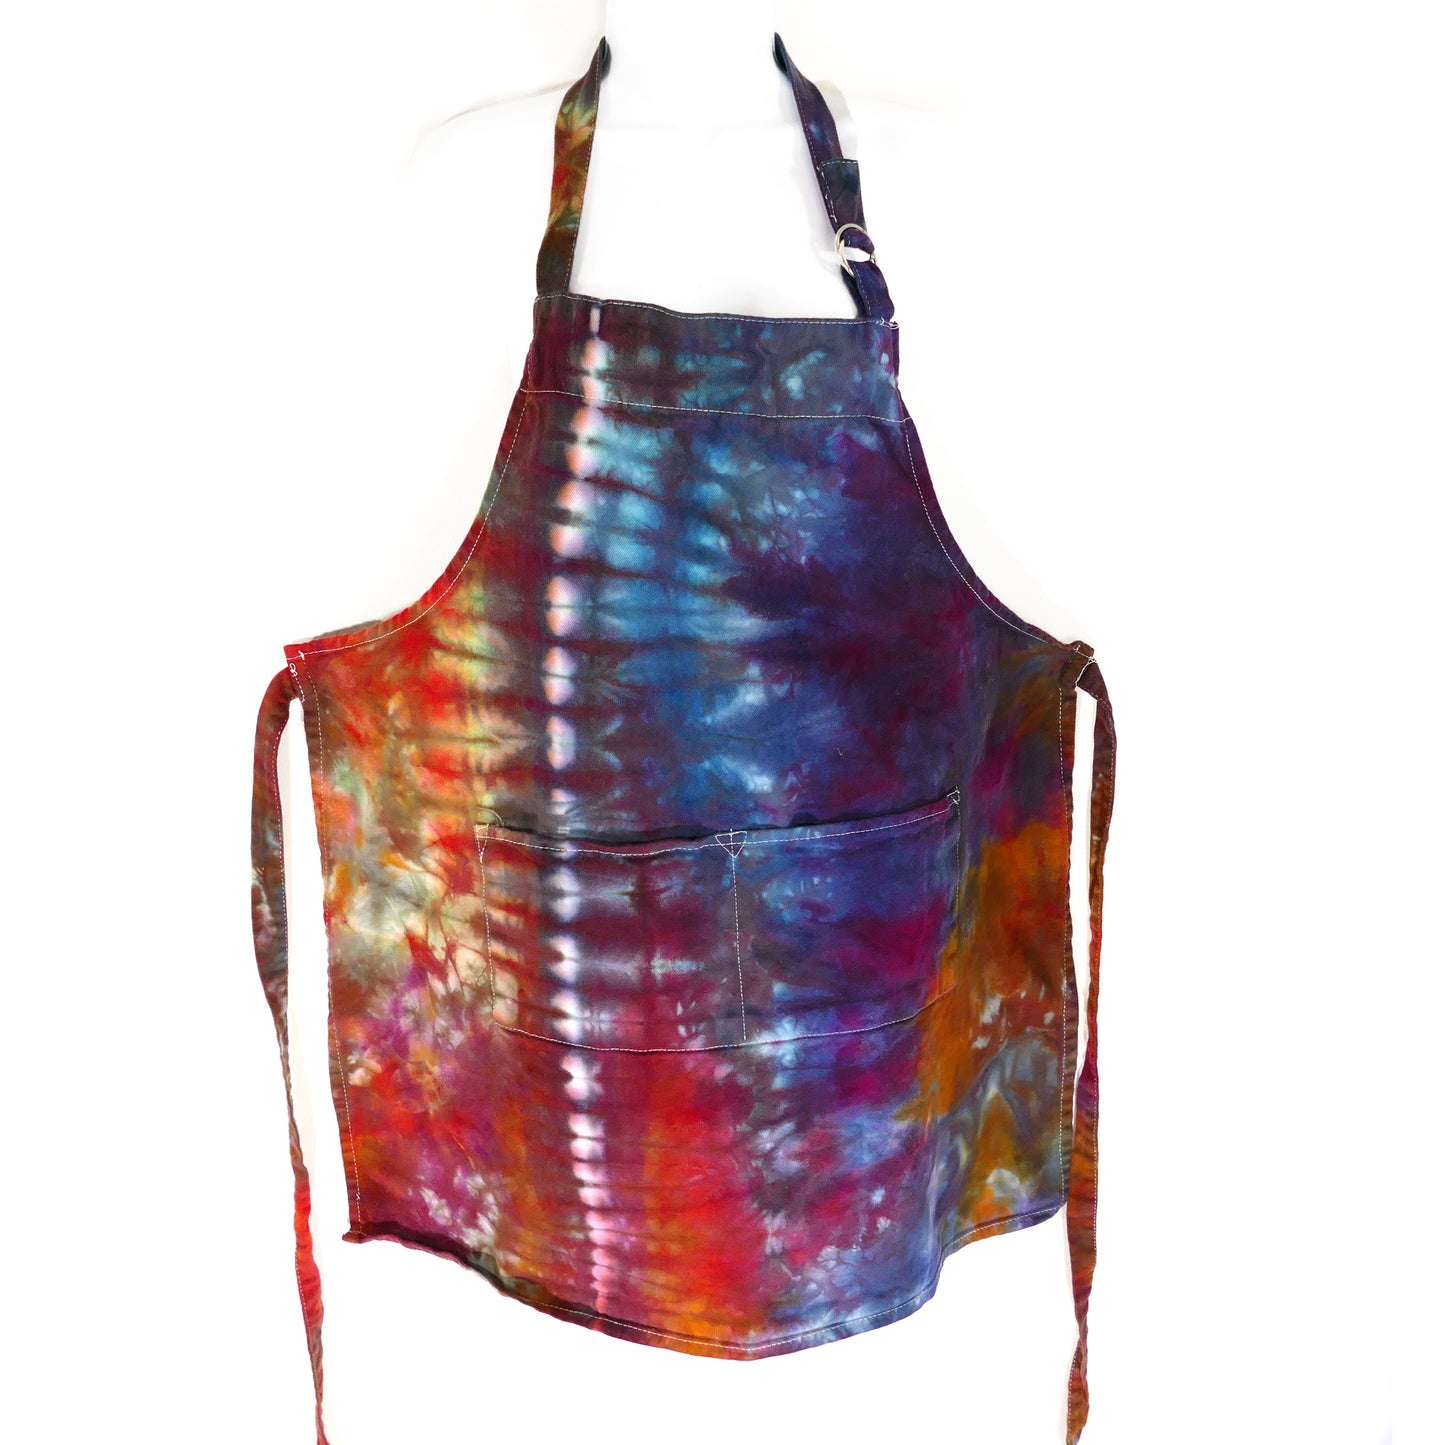 TIE-DYED APRON 2 pockets